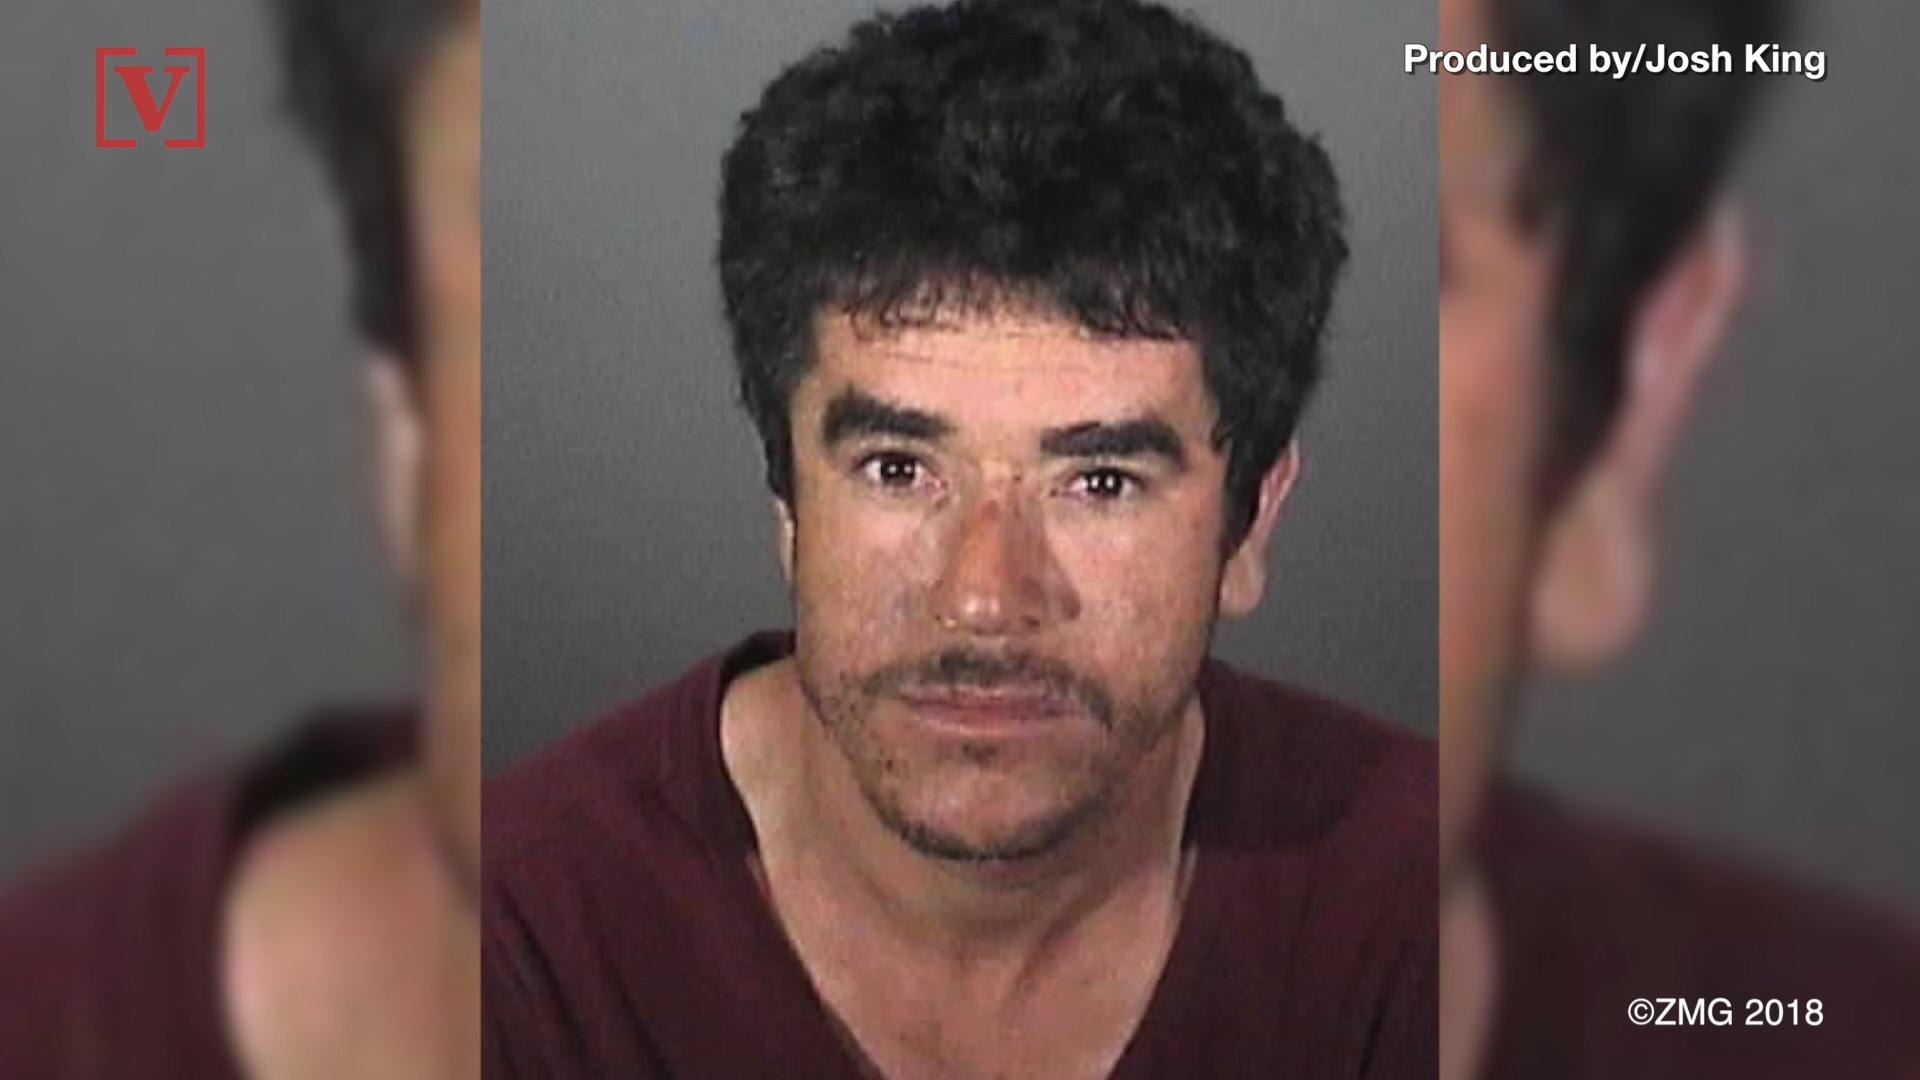 A California Man is Accused of Attacking His Wife With a Chainsaw